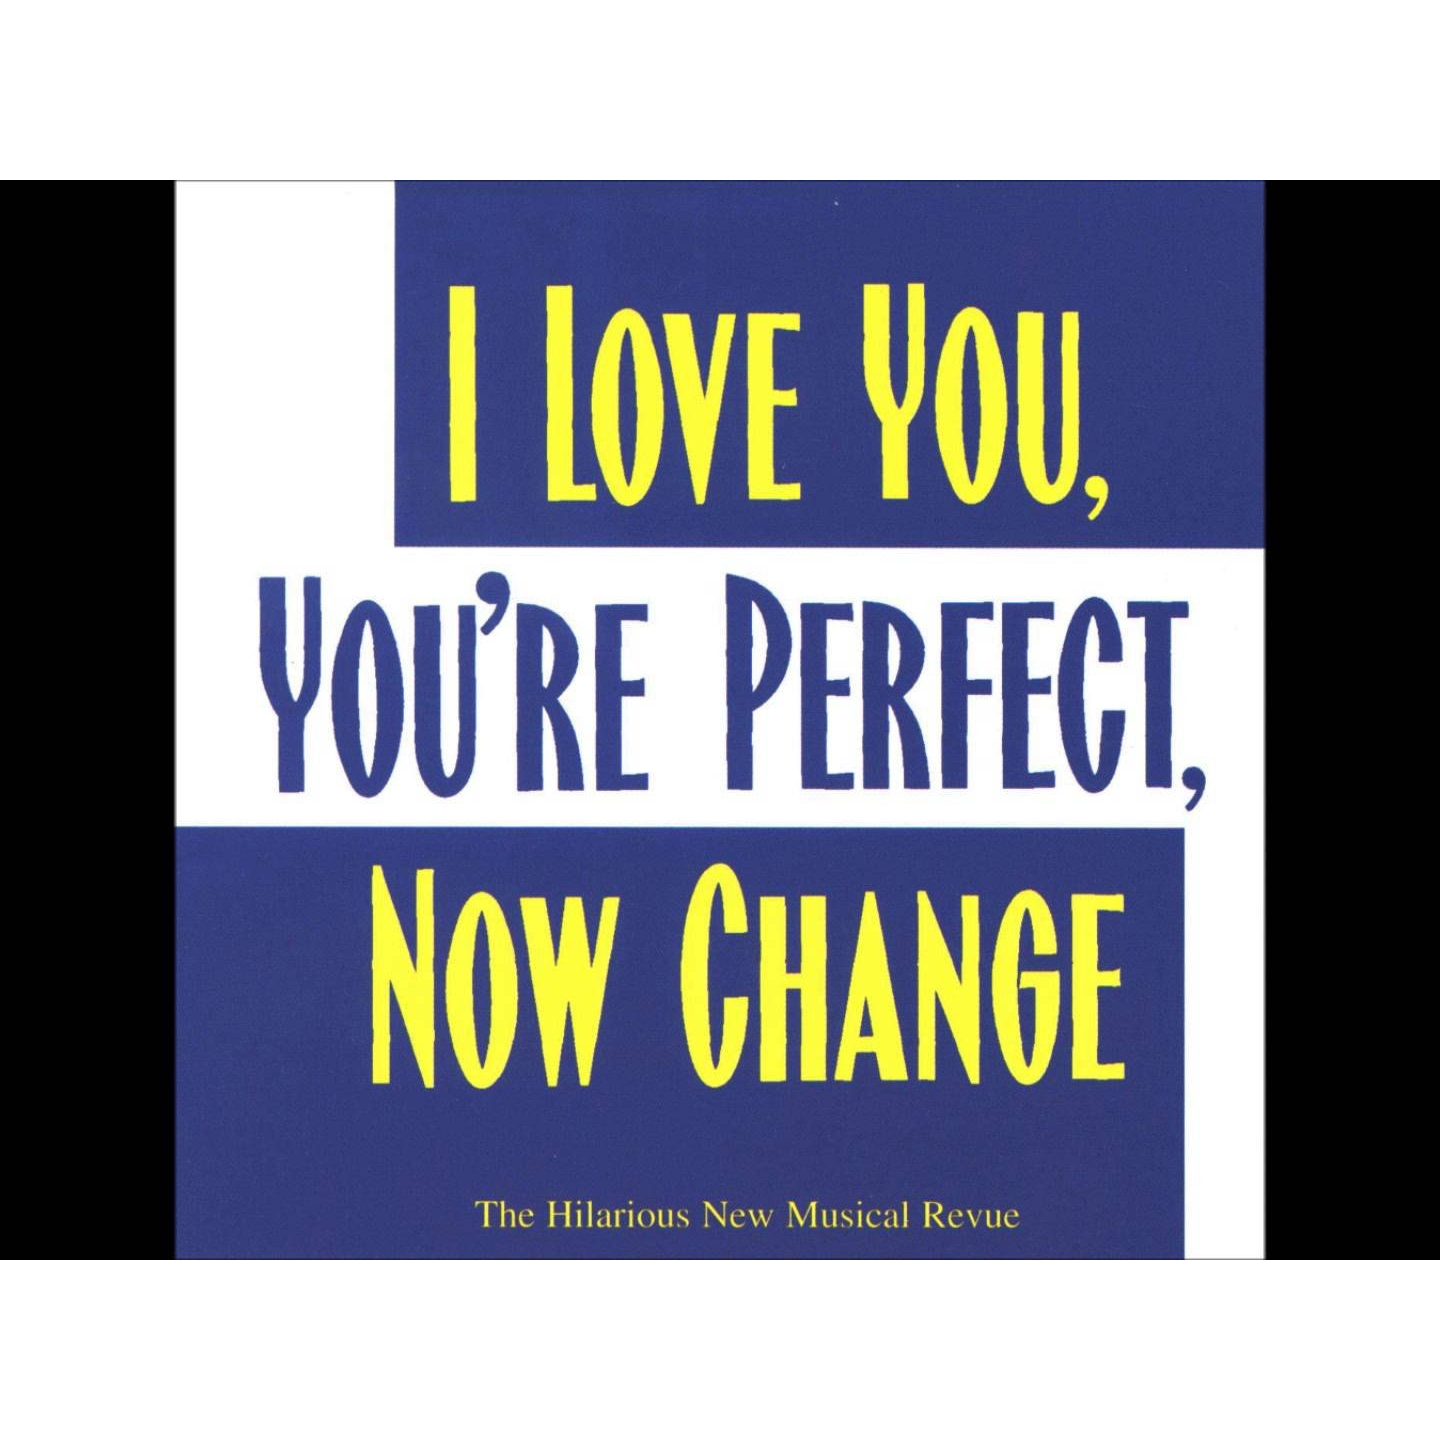 I LOVE YOU, YOURE PERFECT, NOW CHANGE - MUSIC FORM THE OFF-BROADWAY SHOW